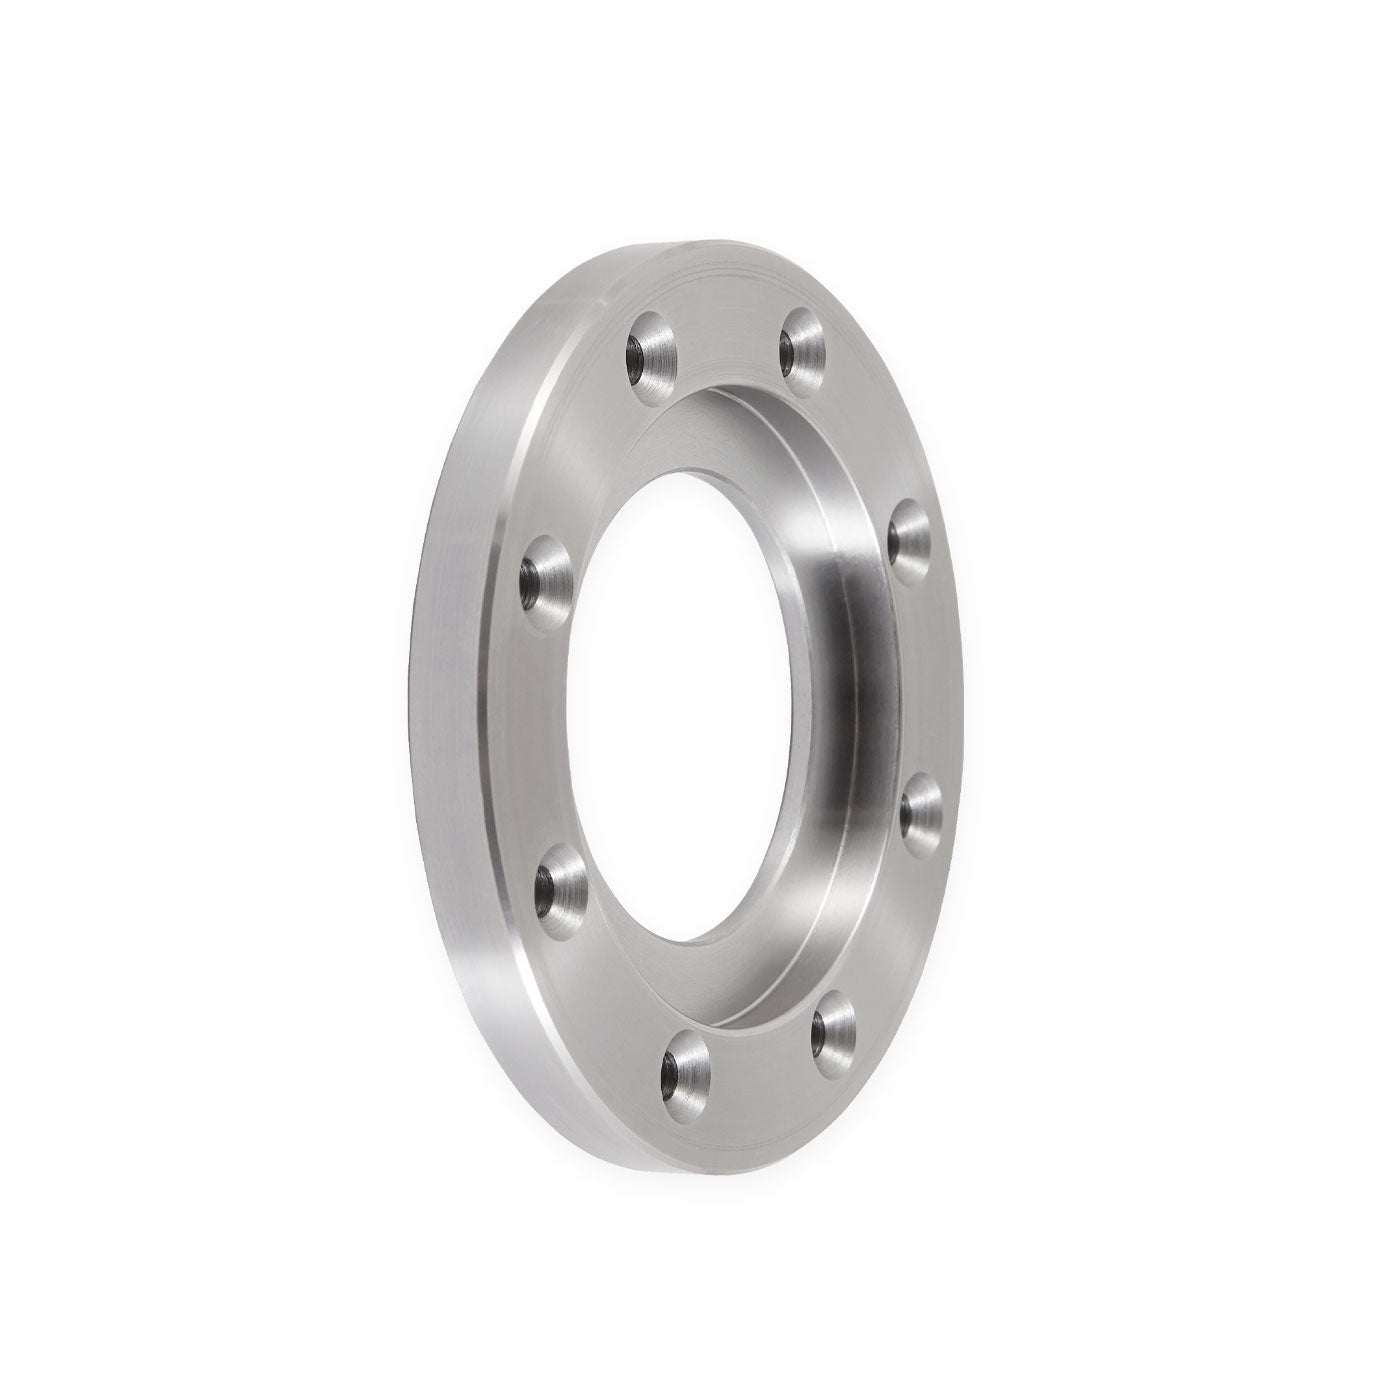 Faceplate Ring 75mm - Precision 100 Chuck